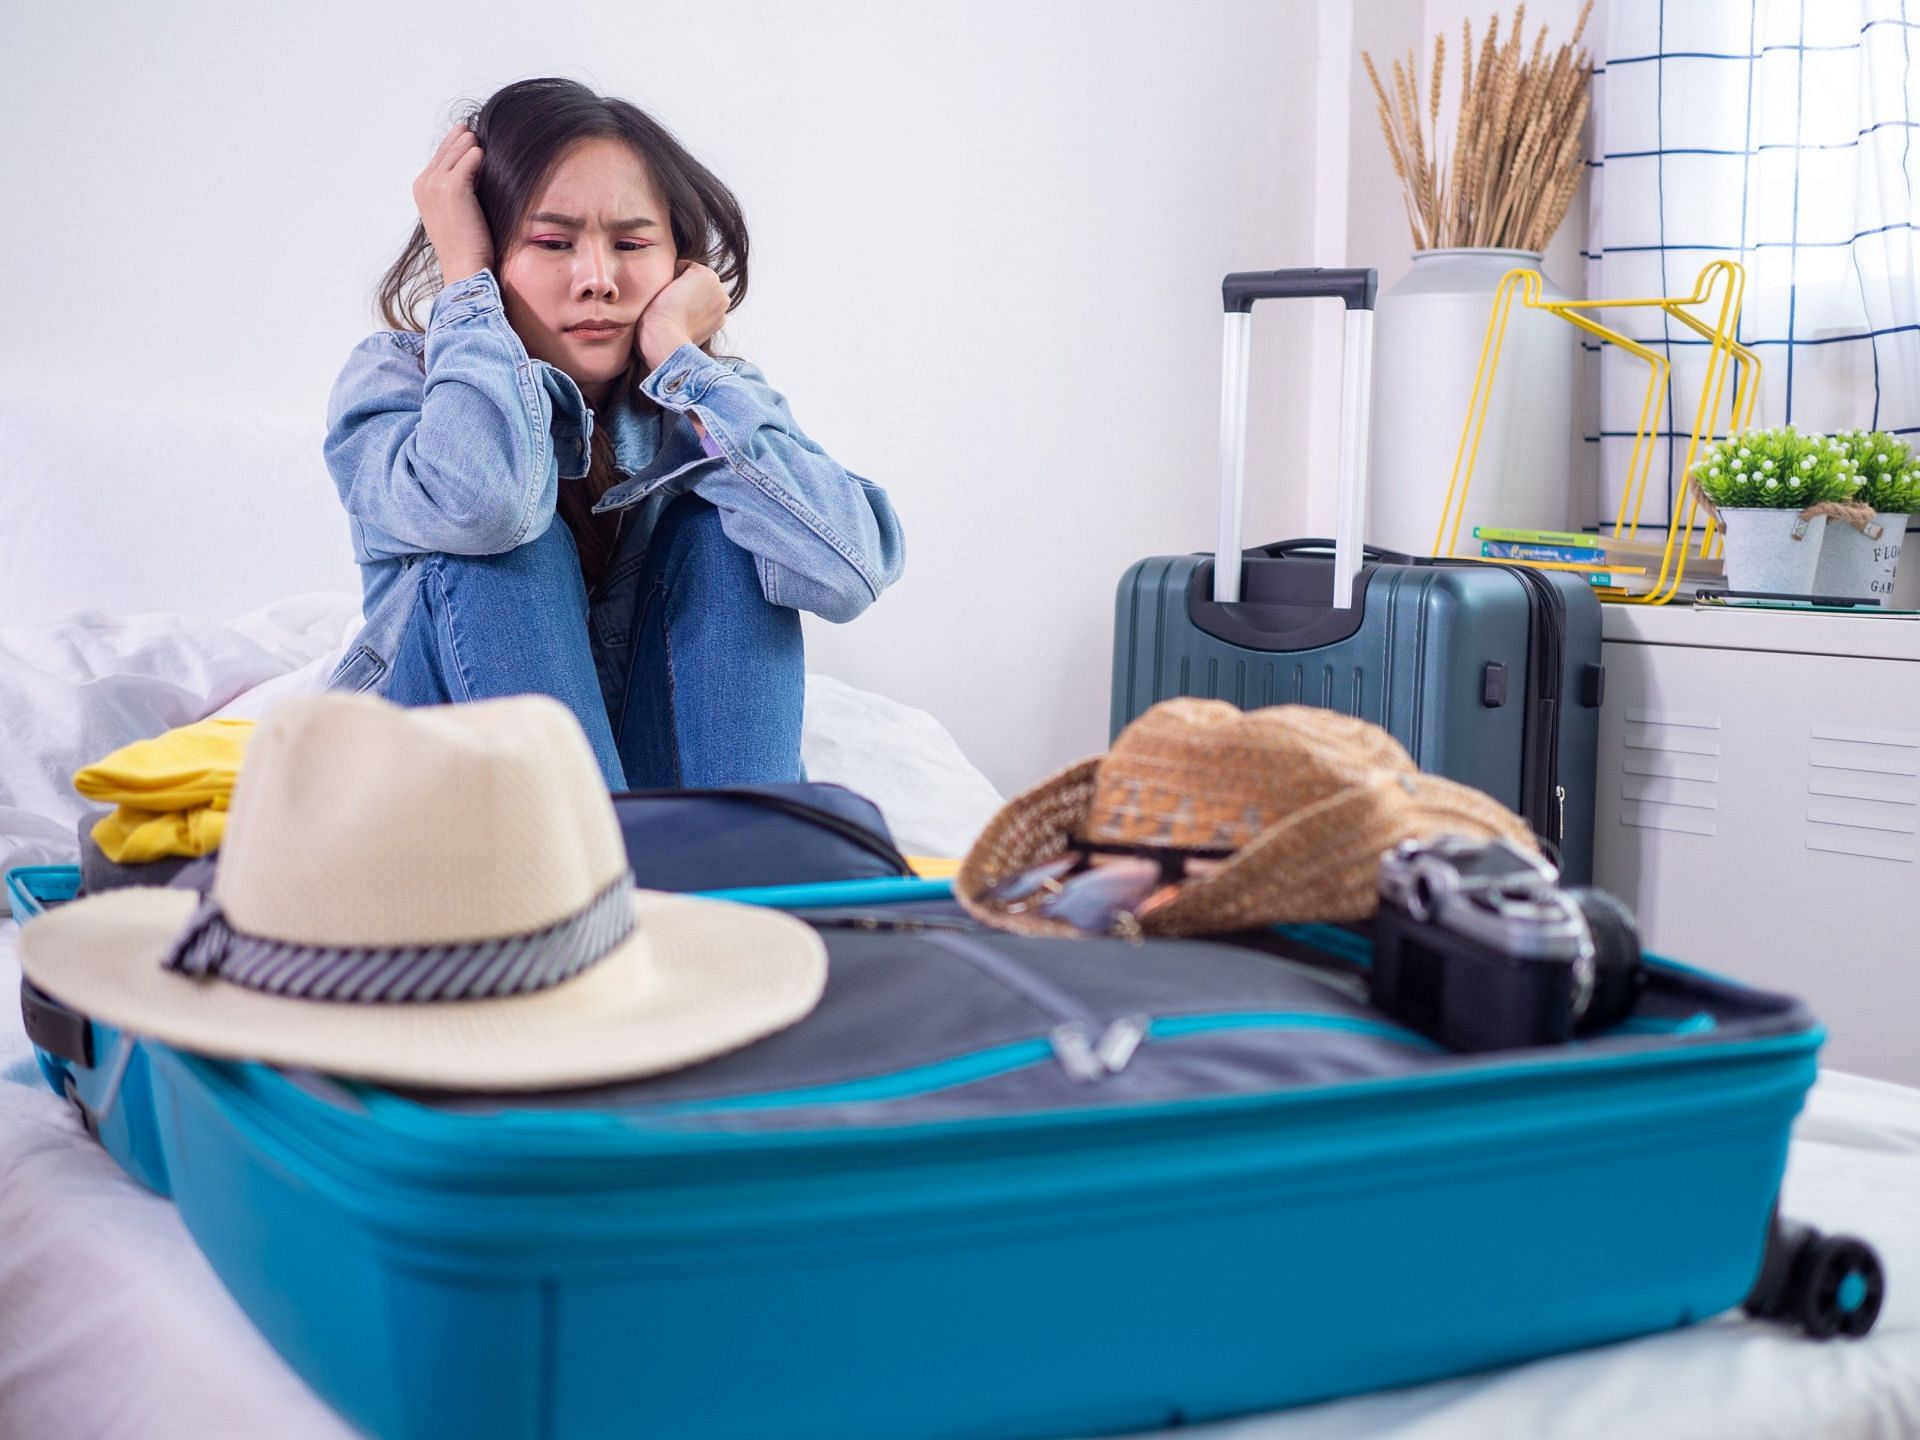 Waiting to pack and go? Here are some holiday stressors to be aware of. (Image via vecteezy/ nuttawan jayawan)